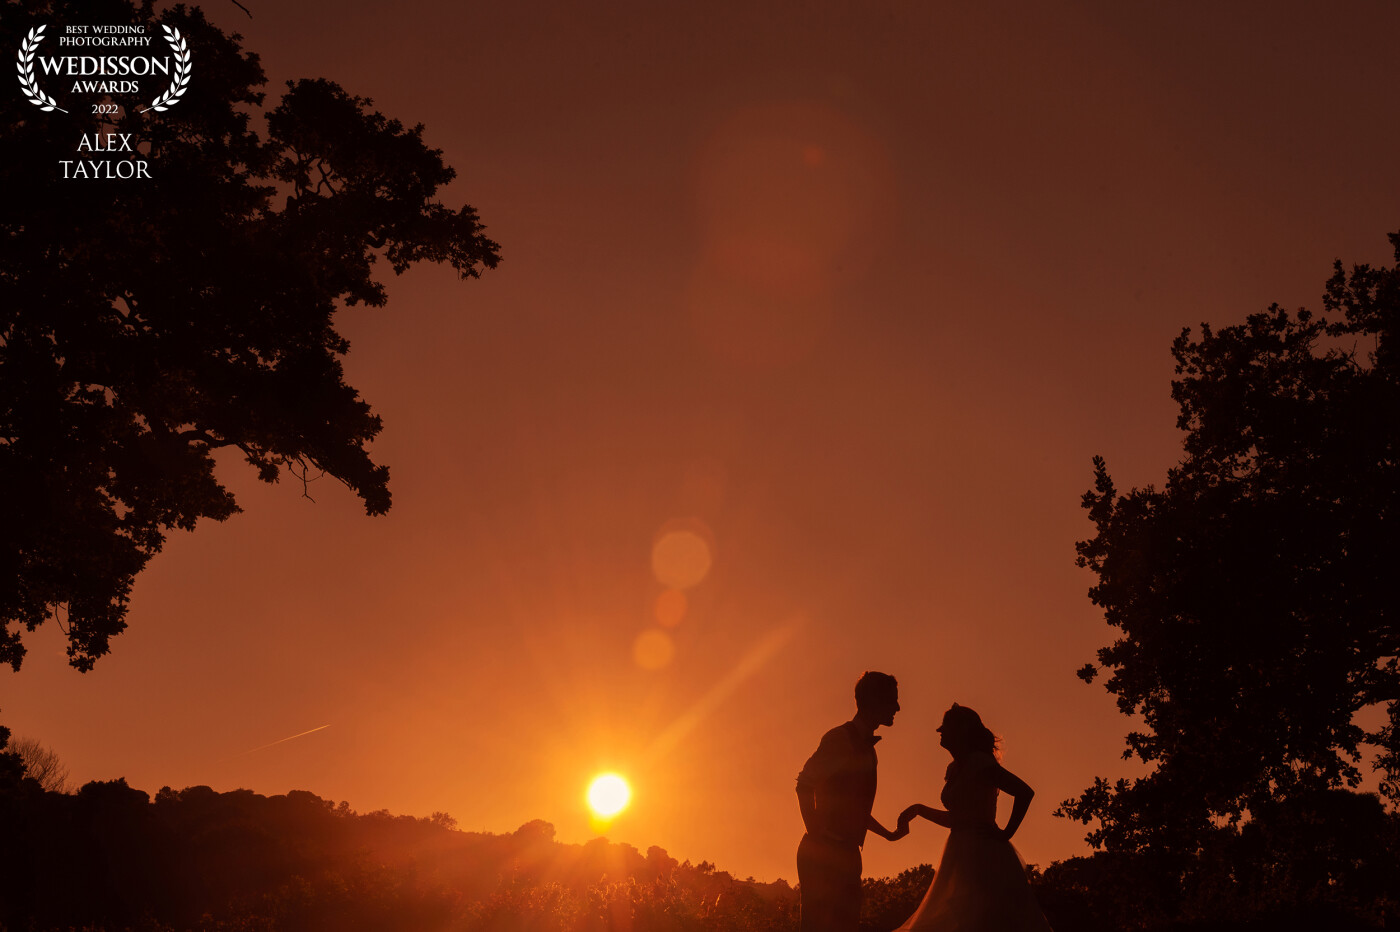 Sunset on Kristina and Caleb's wedding day at The White Hart Inn in Alferton, Derbyshire. <br />
<br />
The sky was vibrant and glowing and I couldn't resist capturing a stunning silhouette as the sun came down in the perfect place between the trees.